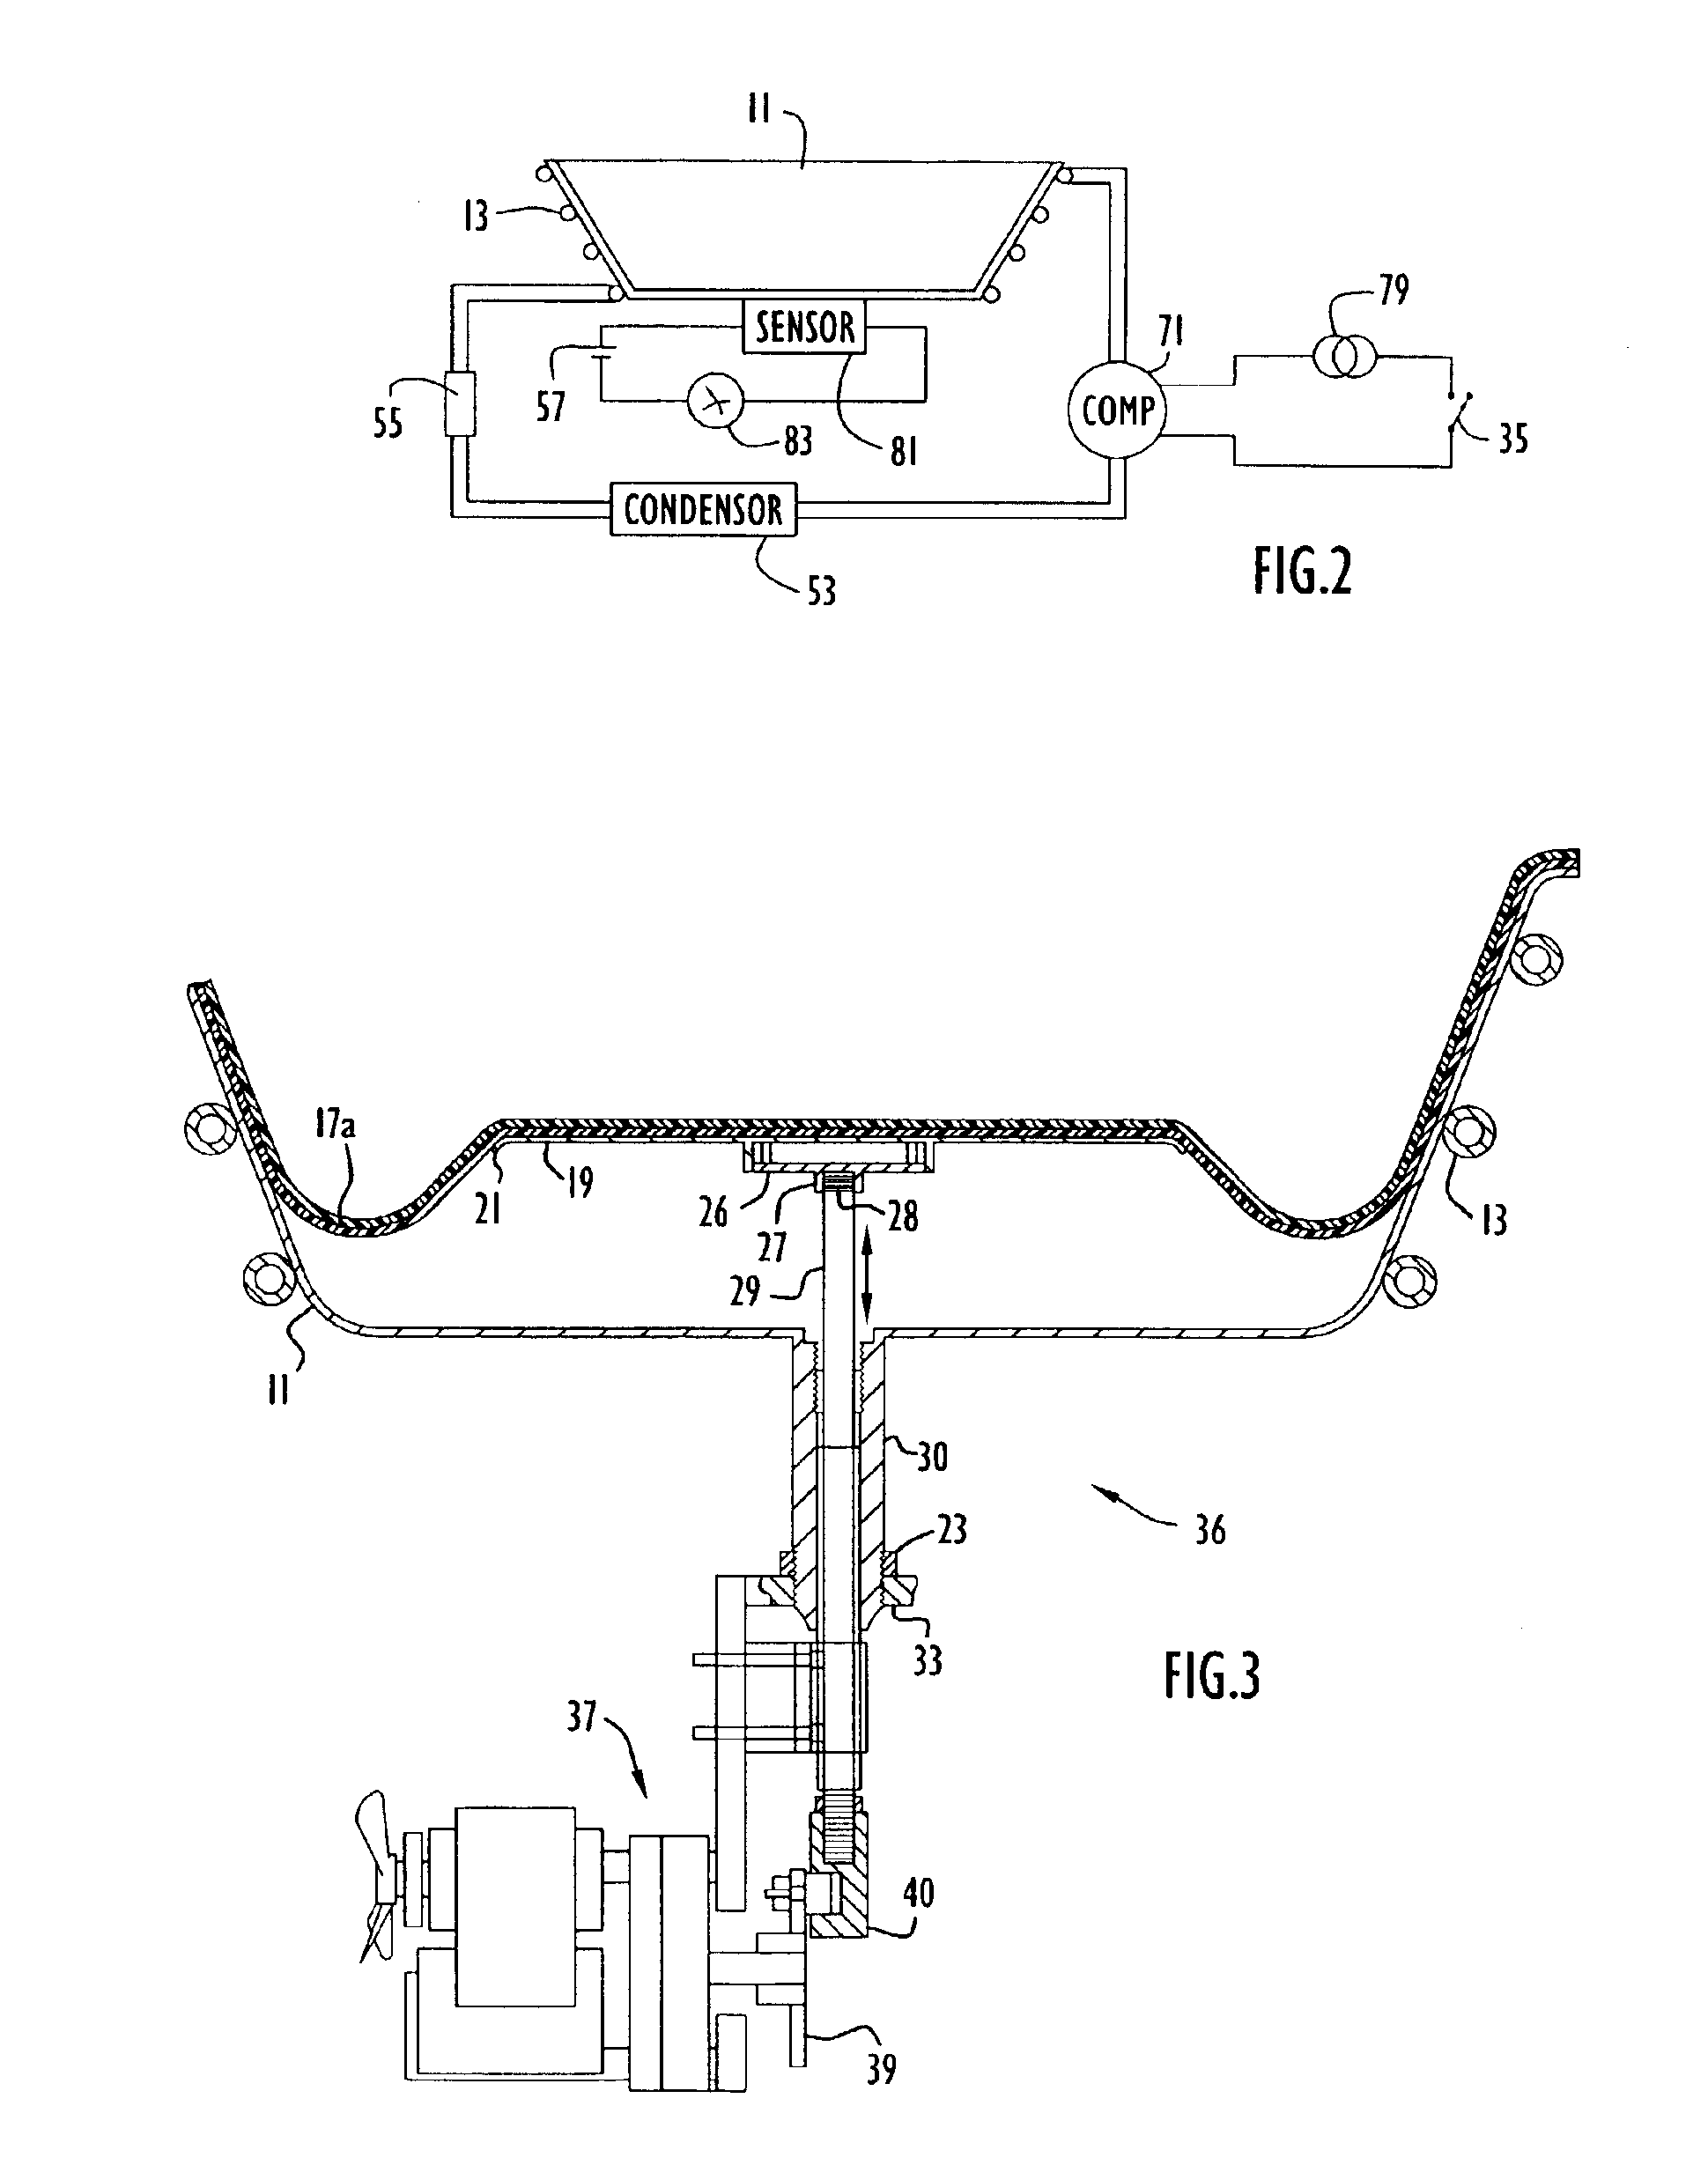 Thermal treatment system and method for controlling the system to thermally treat sterile surgical liquid